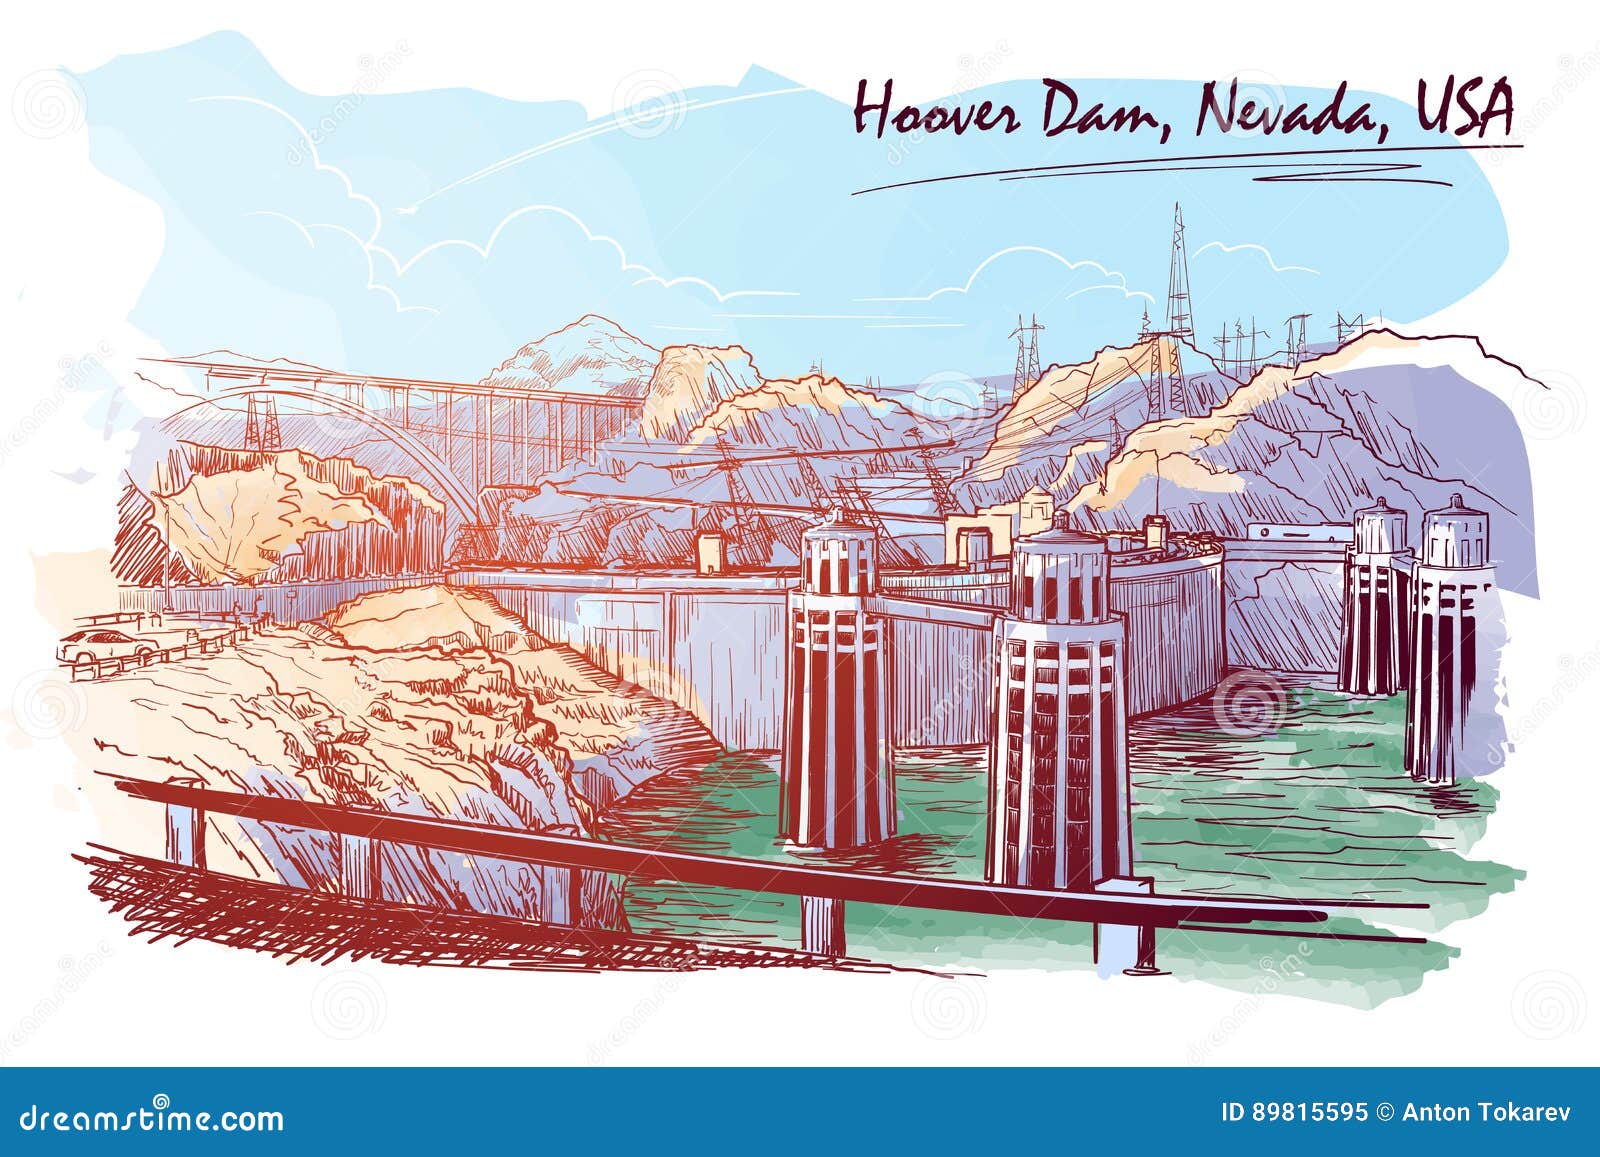 hoover dam stunning panoramic view sketch drawn and painted digitally to give watercolour painting feel.